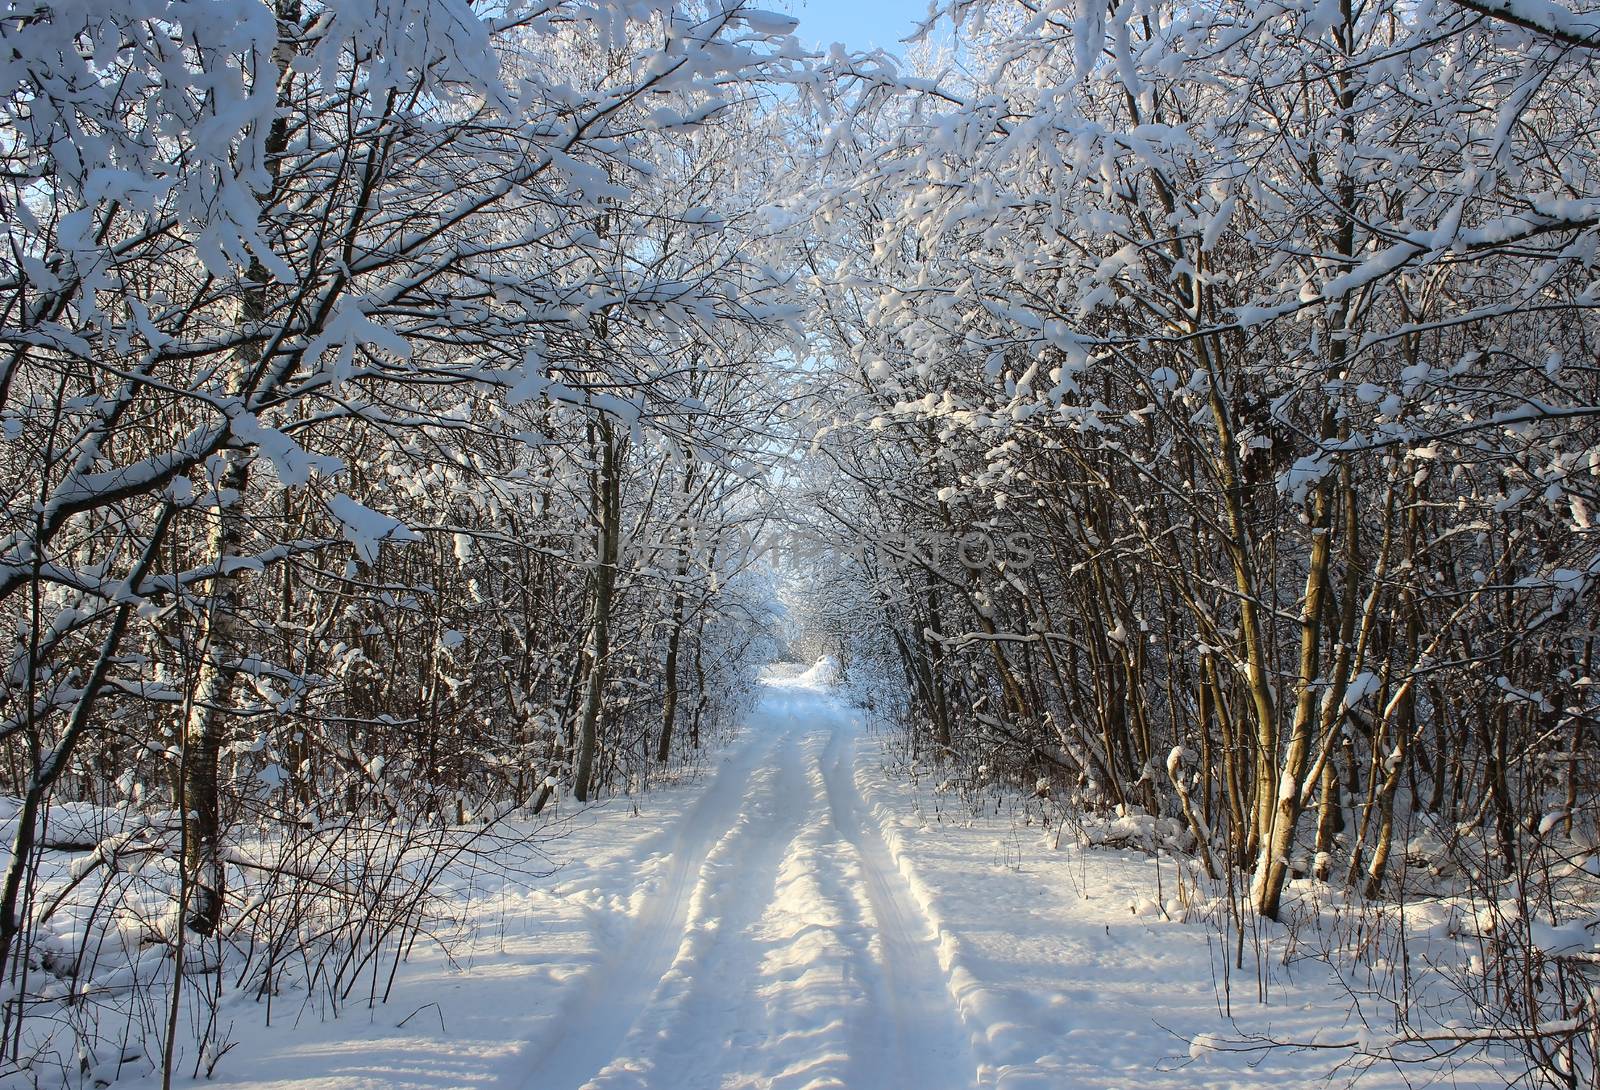 Winter forest and road after a snowfall on Christmas in the dead of winter.